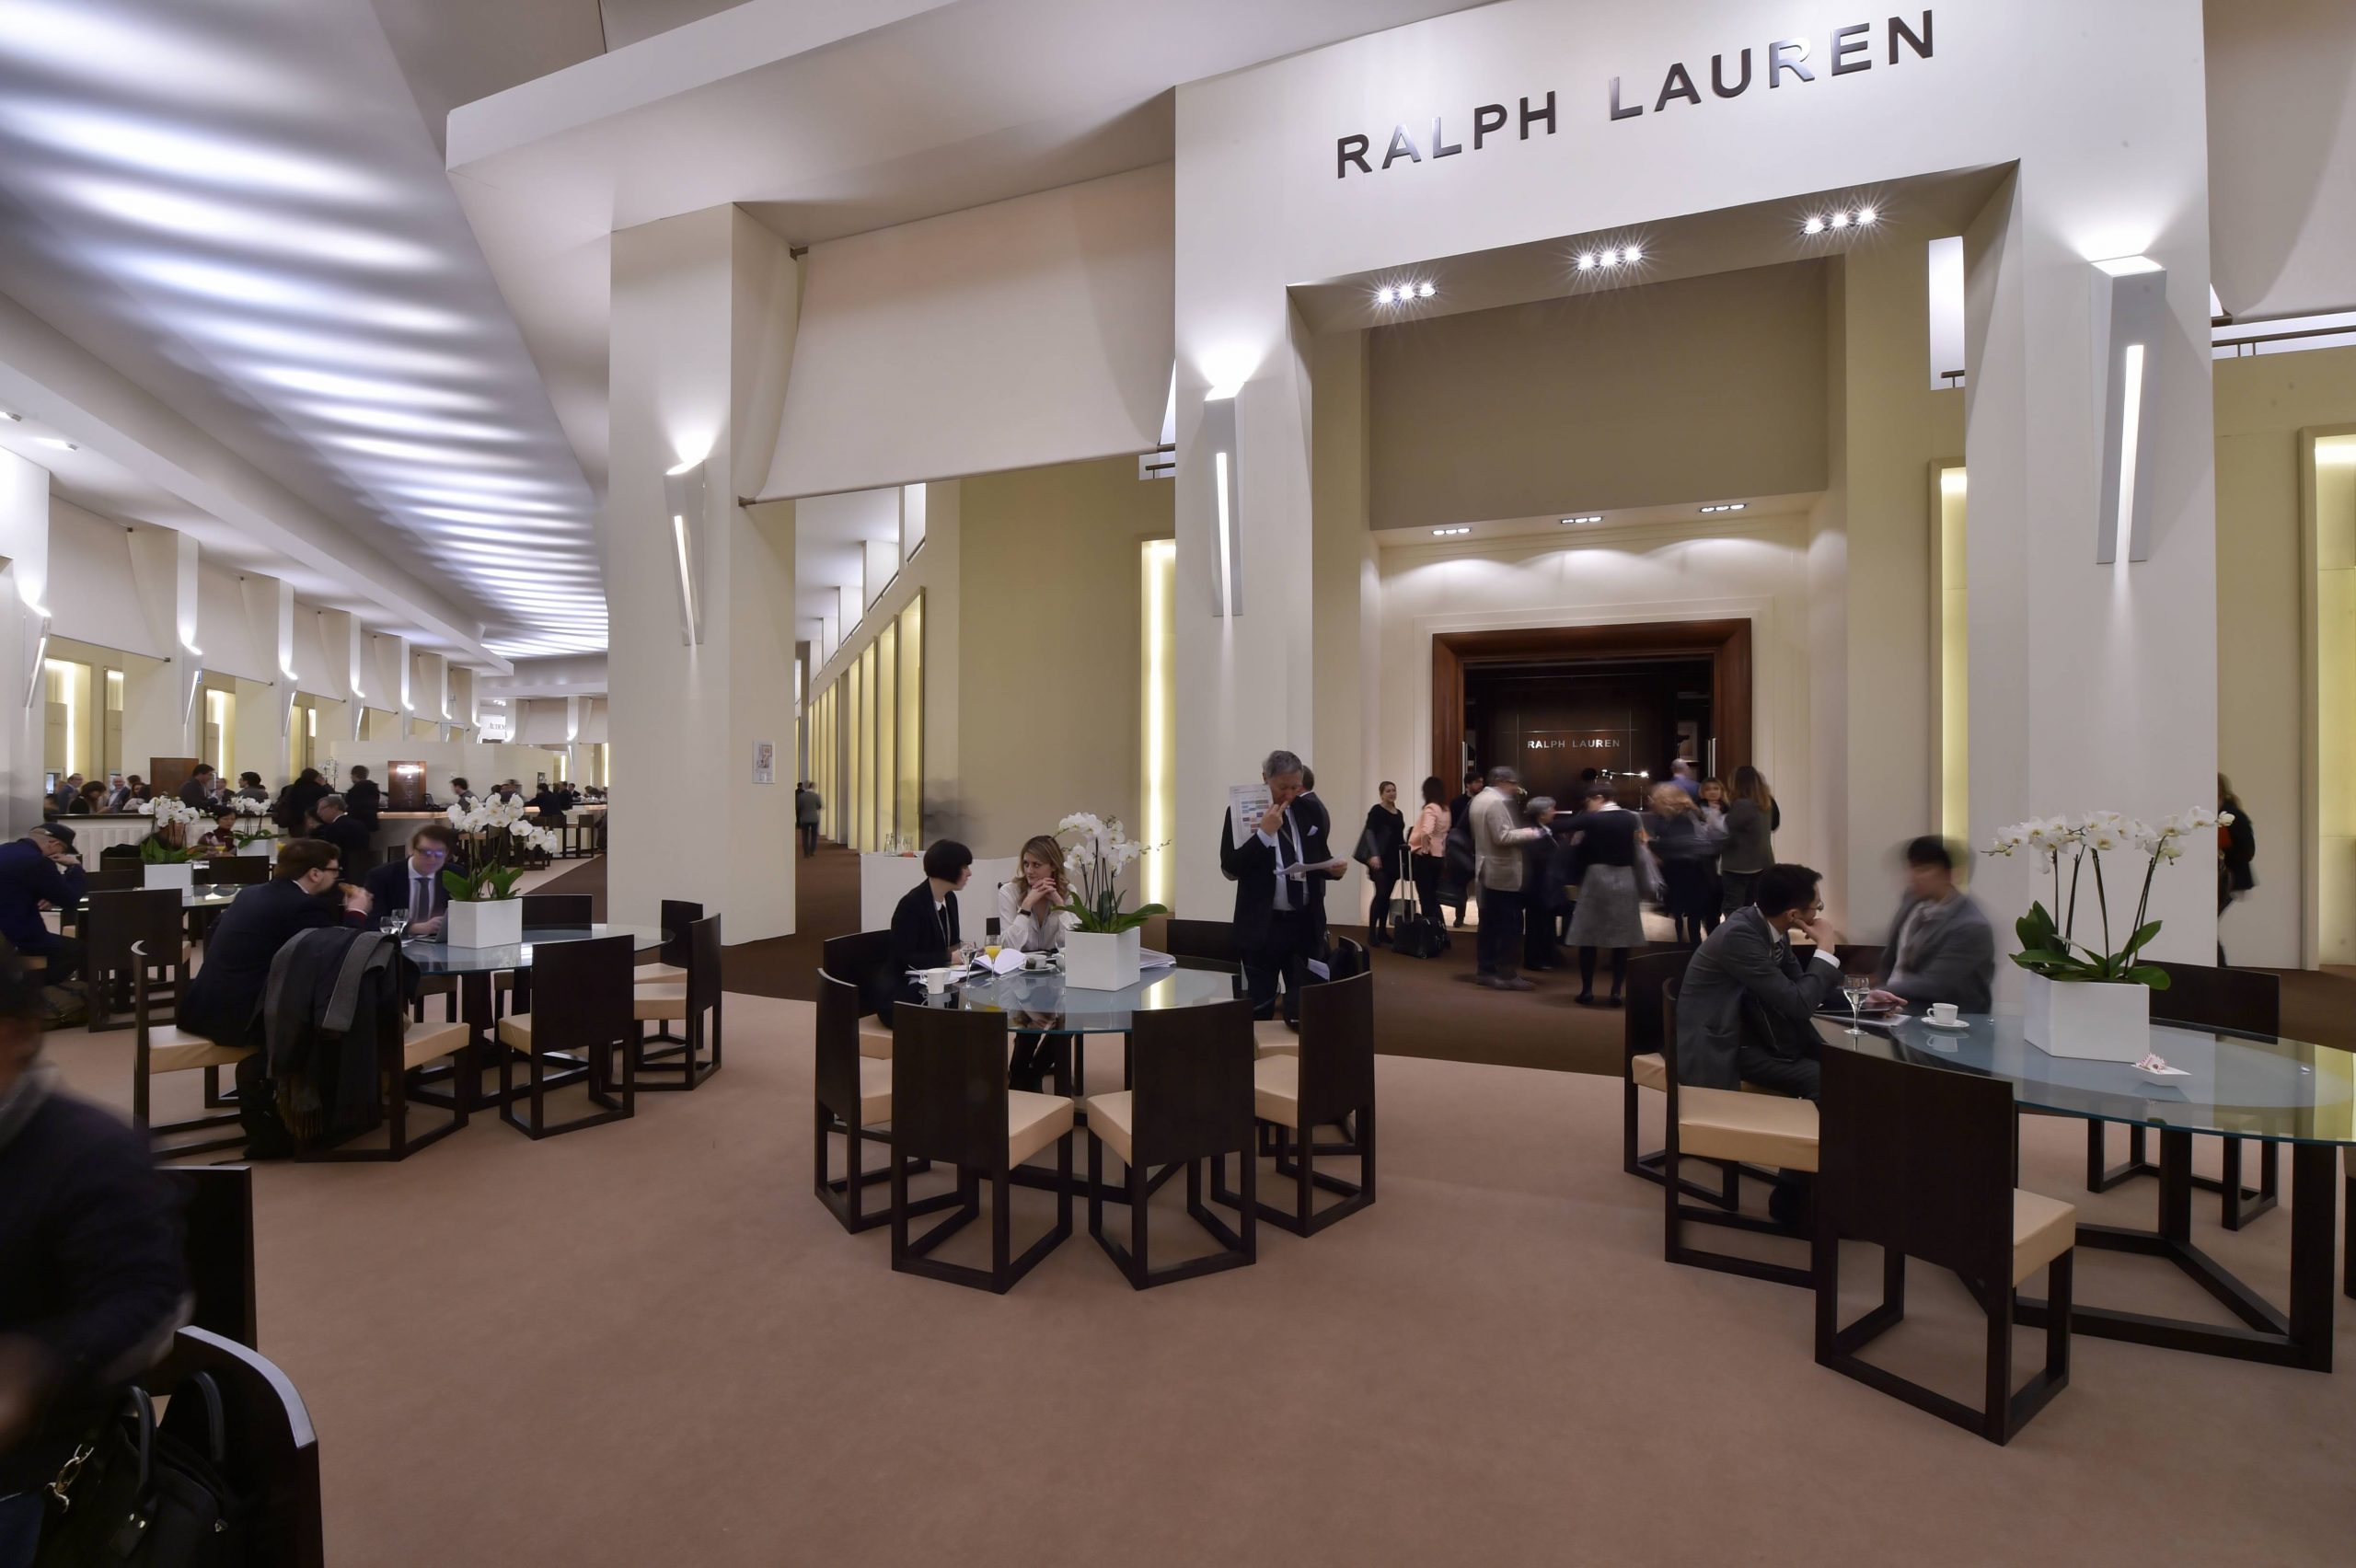 What To Expect From SIHH 2016, And The New Exhibitors